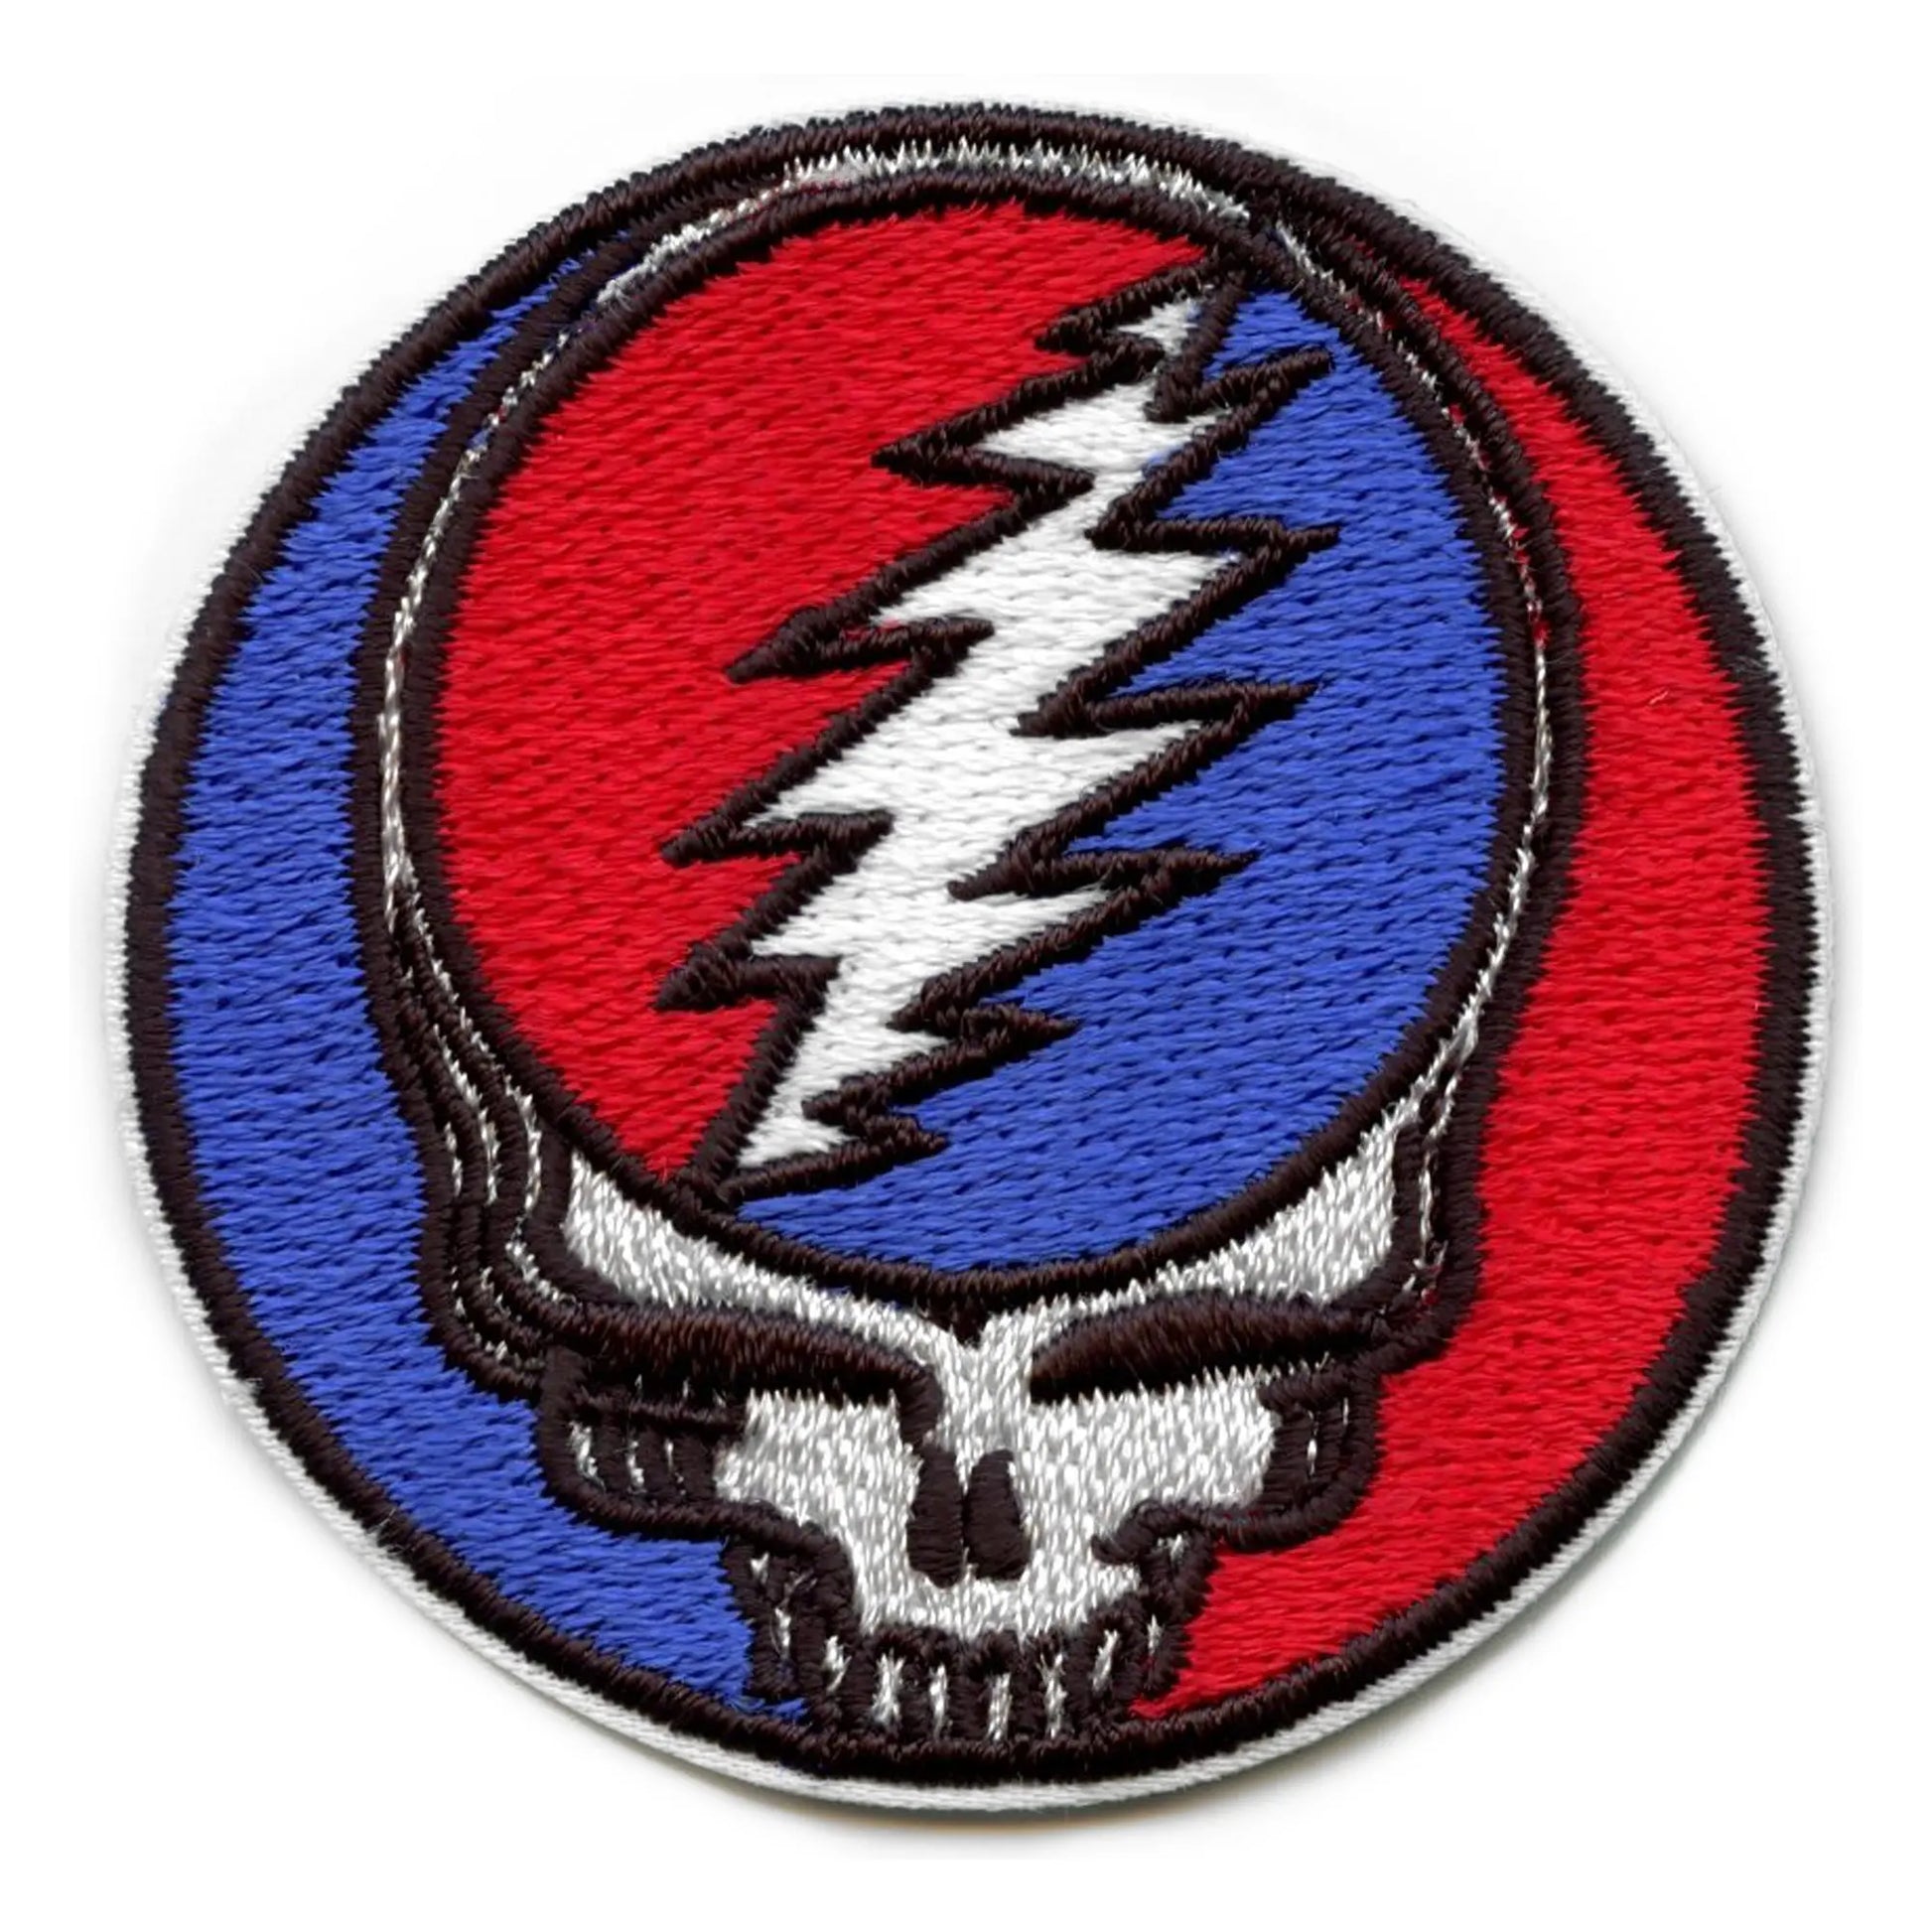 Grateful Dead Patch Steal Your Face Embroidered Iron On - Small 